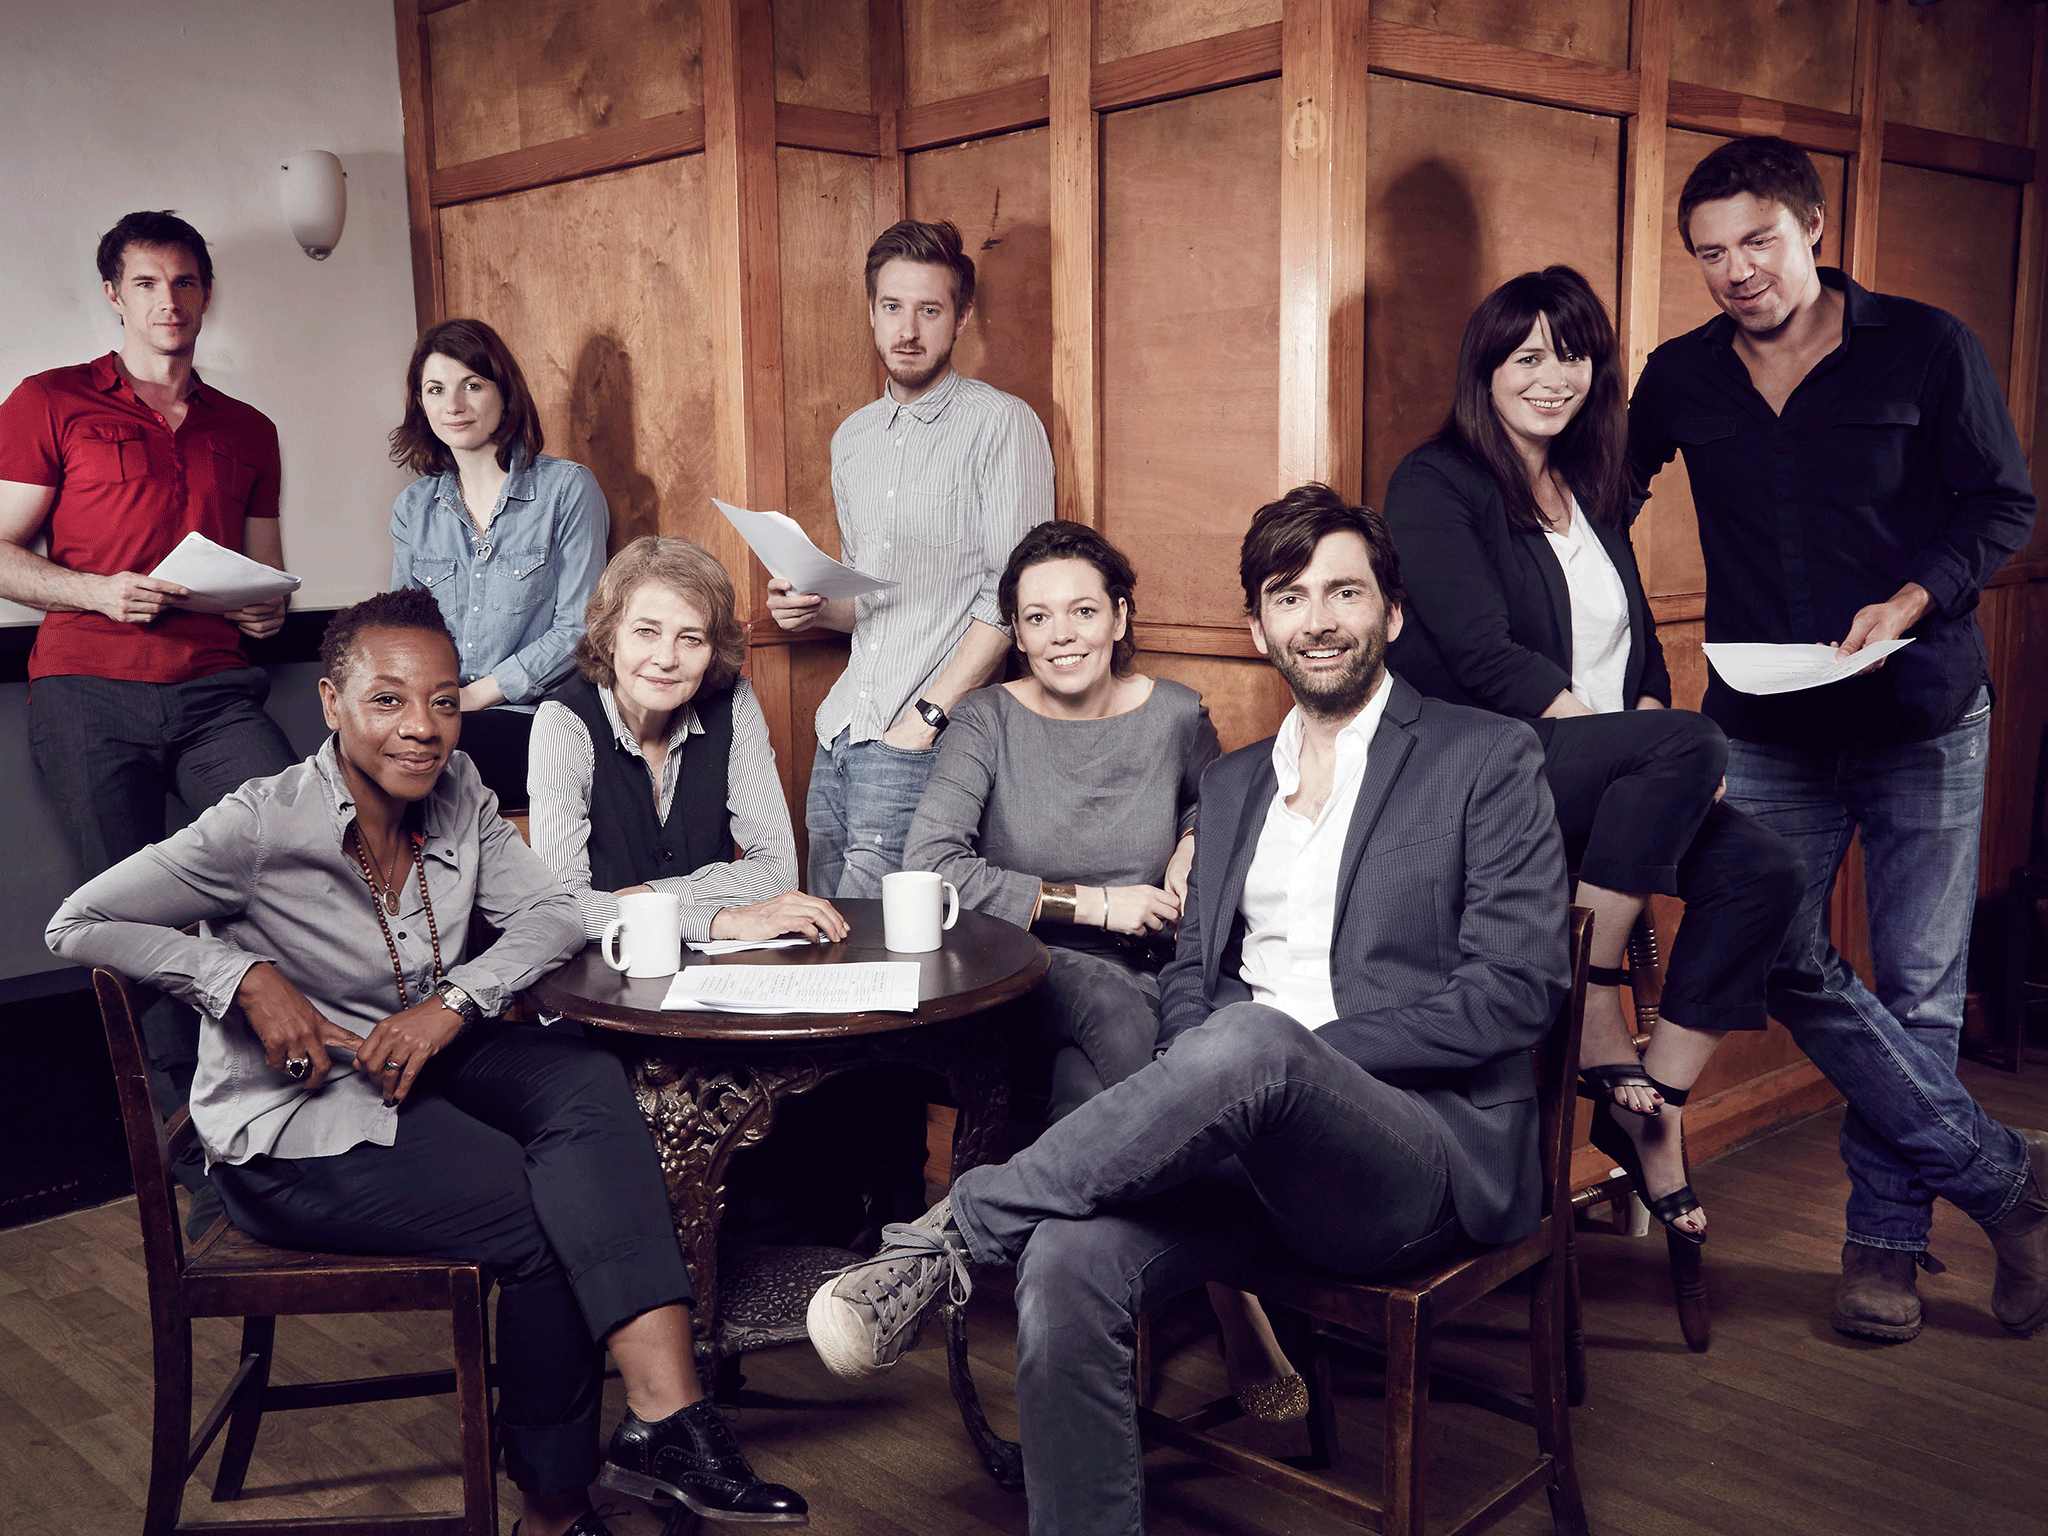 The Broadchurch 2 cast read through Chris Chibnall's 'brilliant' new script ahead of shooting